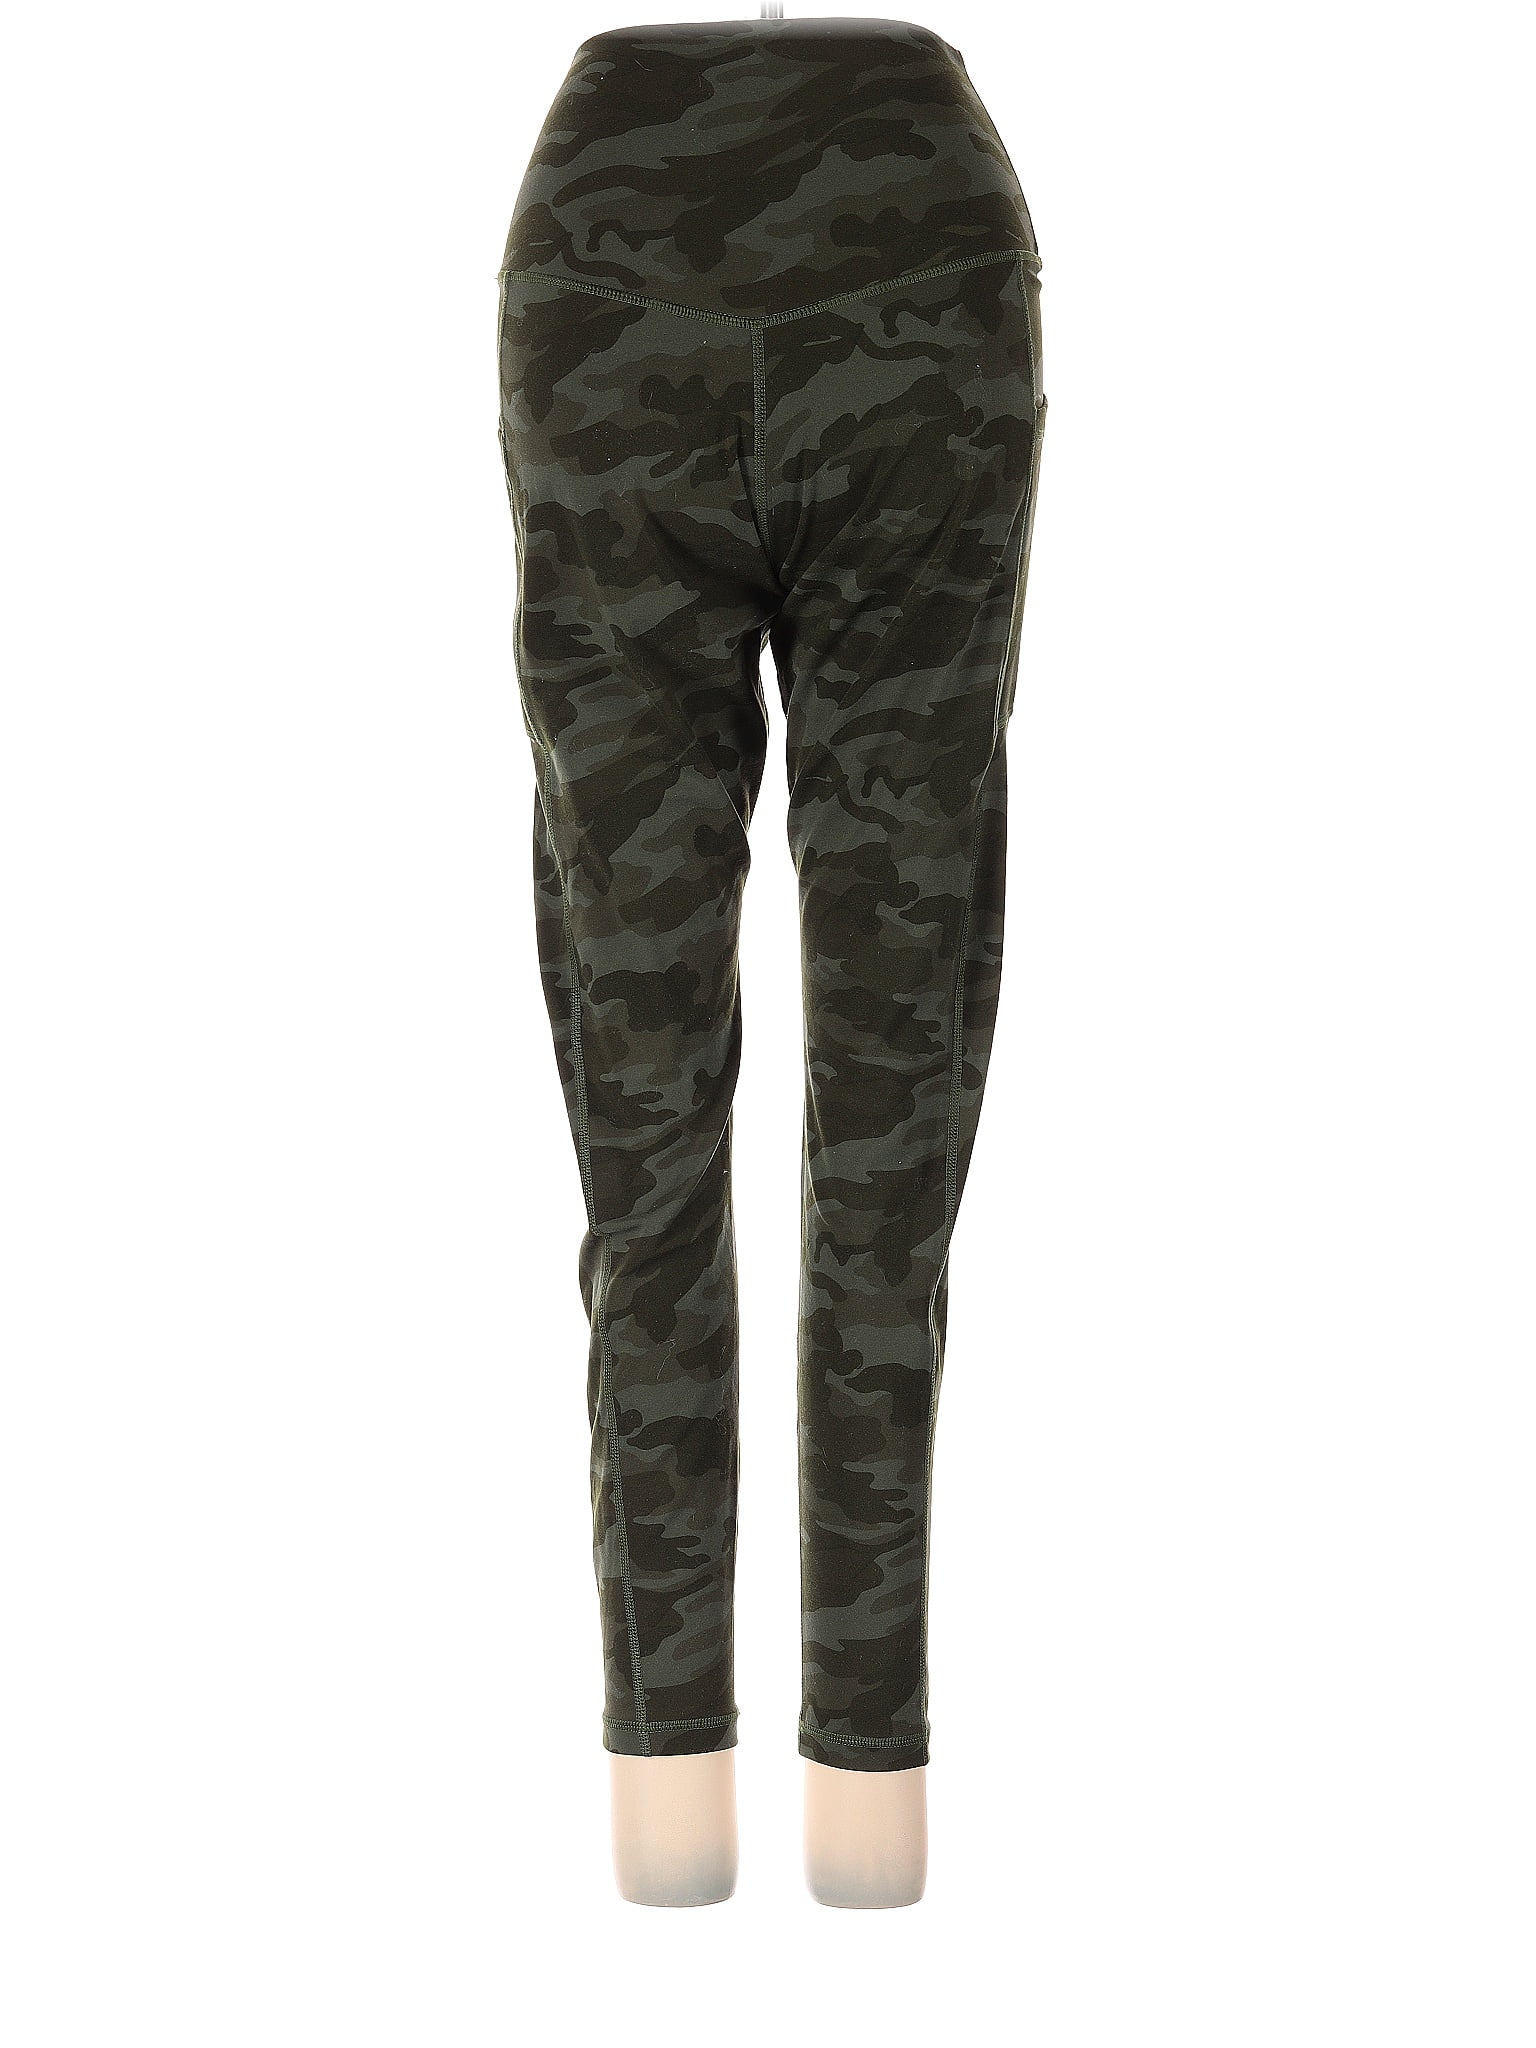 Colorfulkoala Joggers Black Size XS - $20 (47% Off Retail) - From